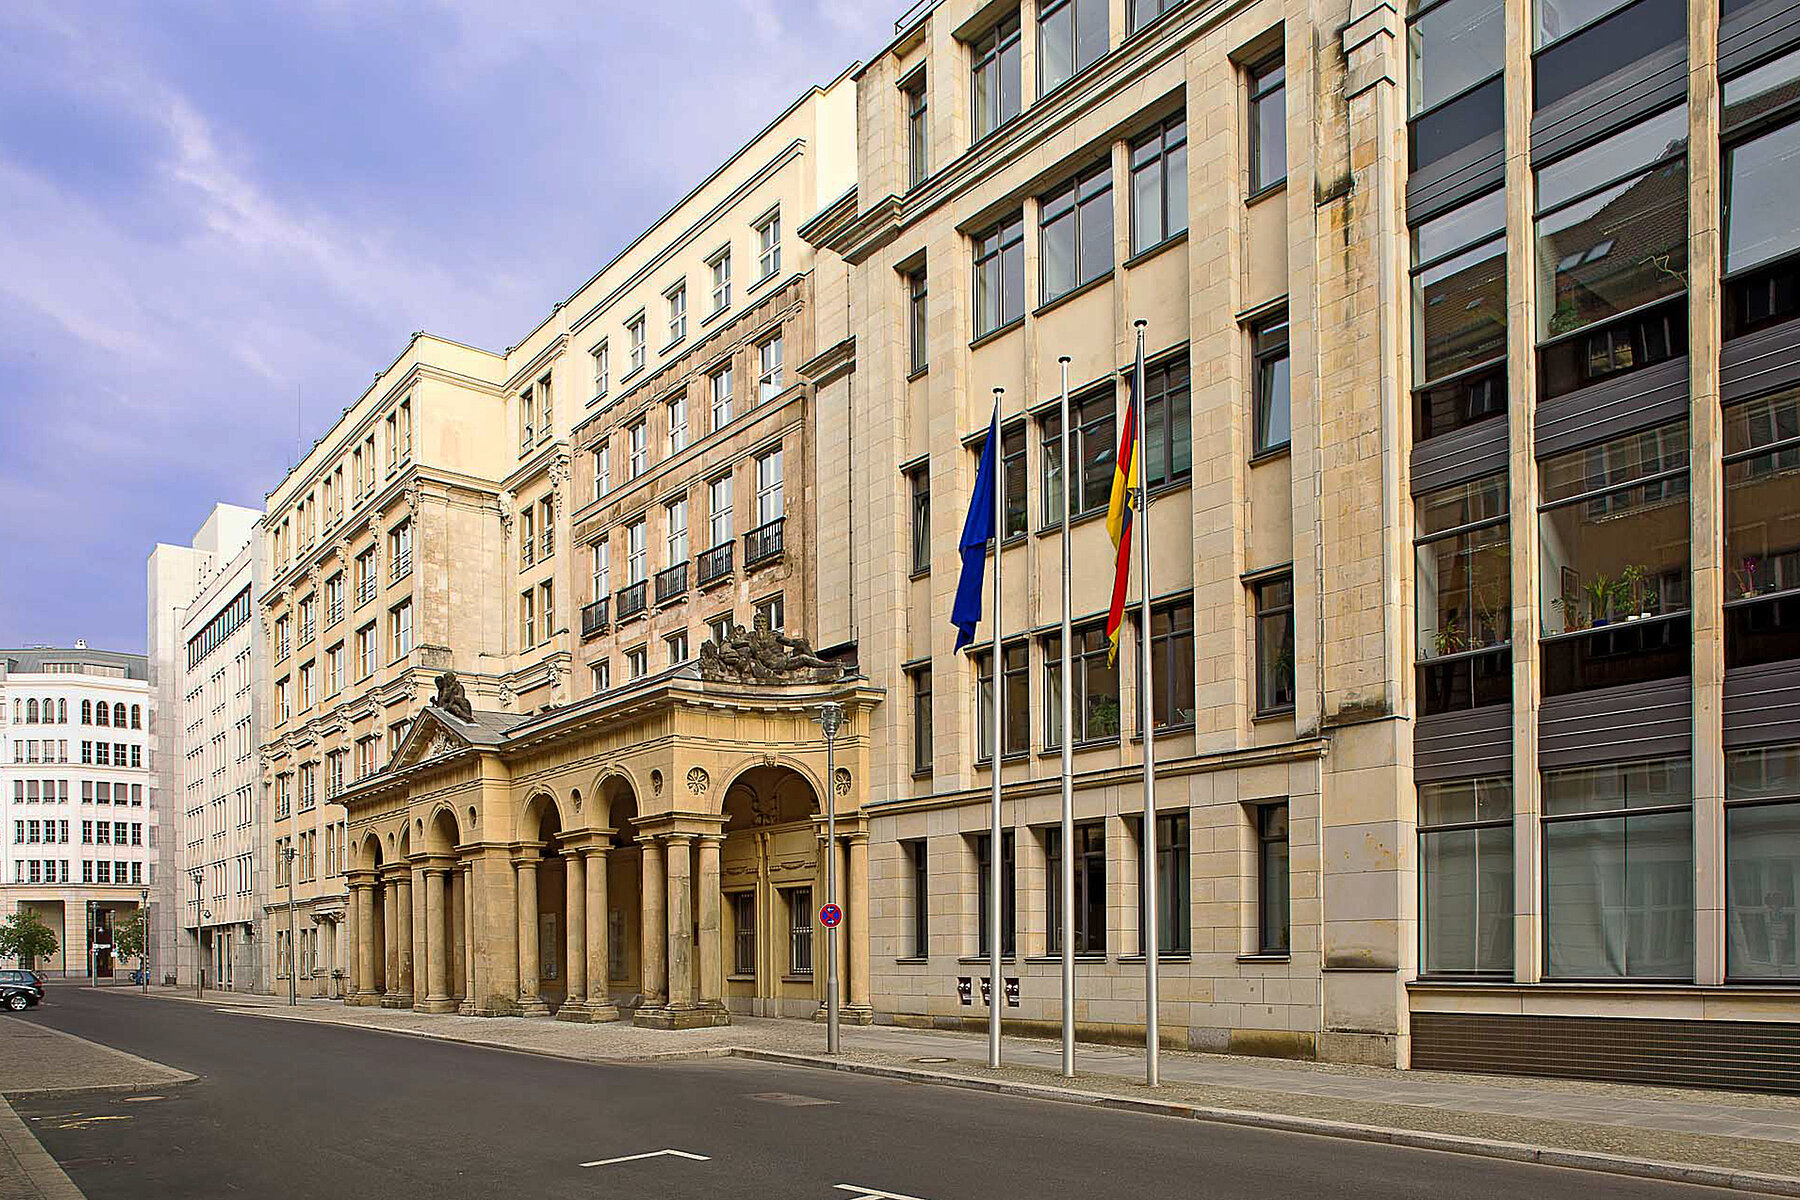 Mohrenstraße with houses on the left side of the street. In the centre, today's Ministry of Justice with columns in the entrance area.